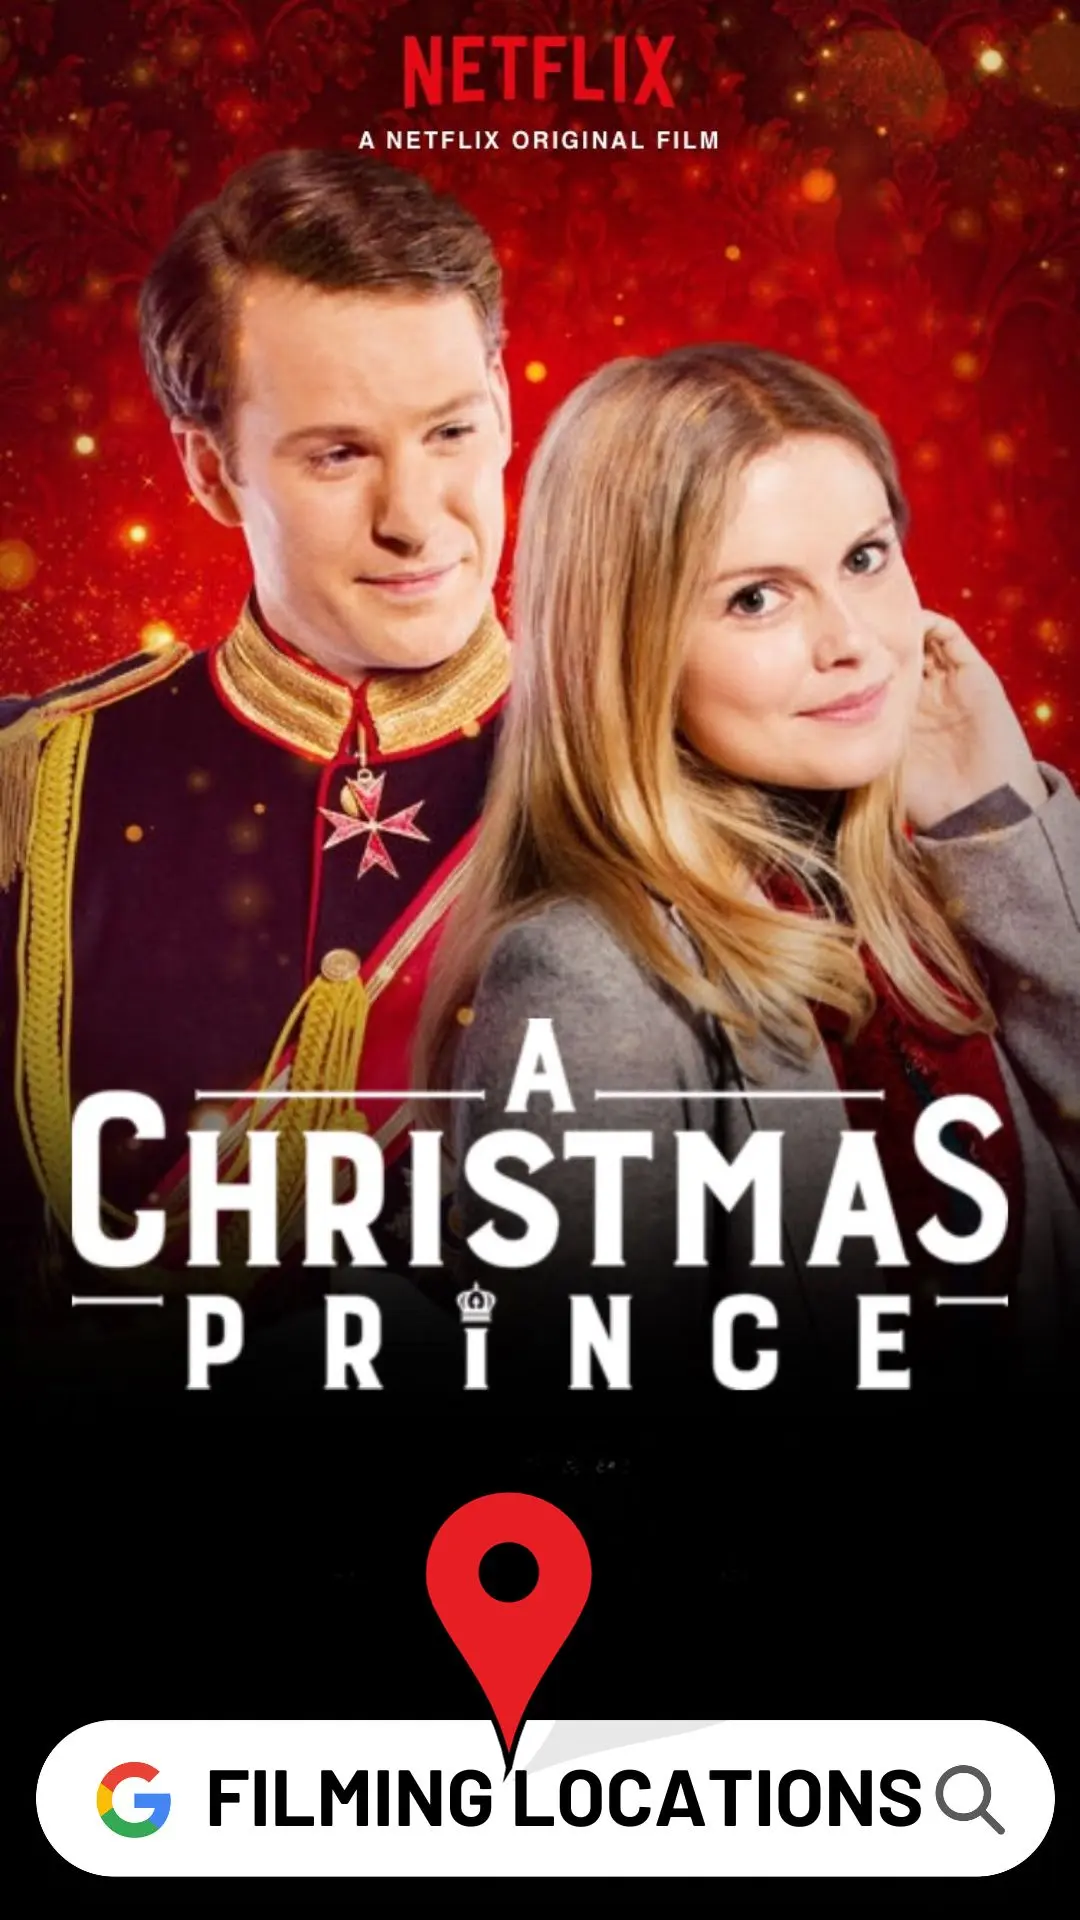 A Christmas Prince Filming Locations